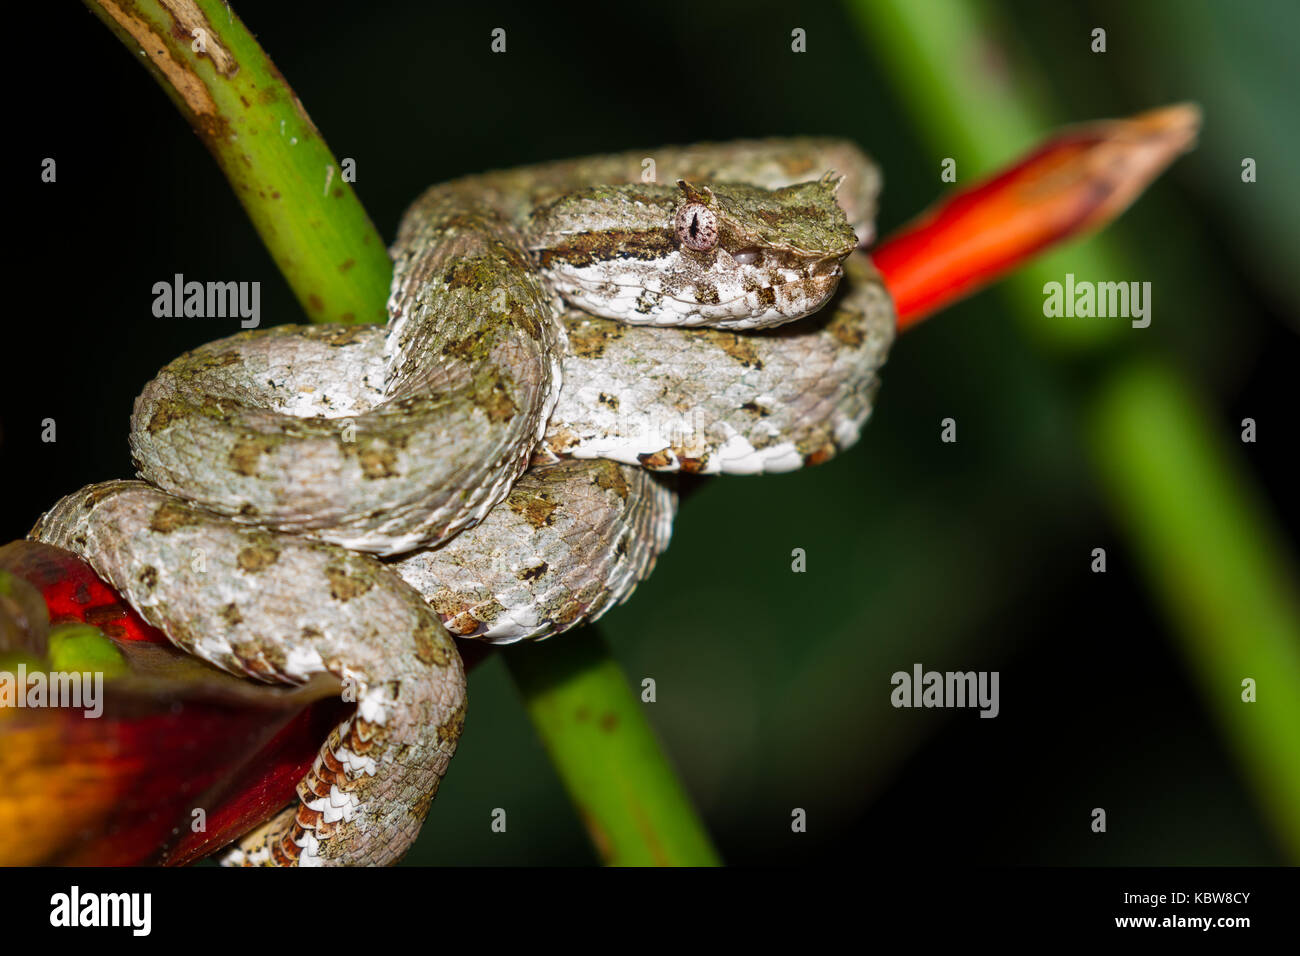 Close up of a eyelash viper wrapped around a tropical flower in Costa Rica Stock Photo